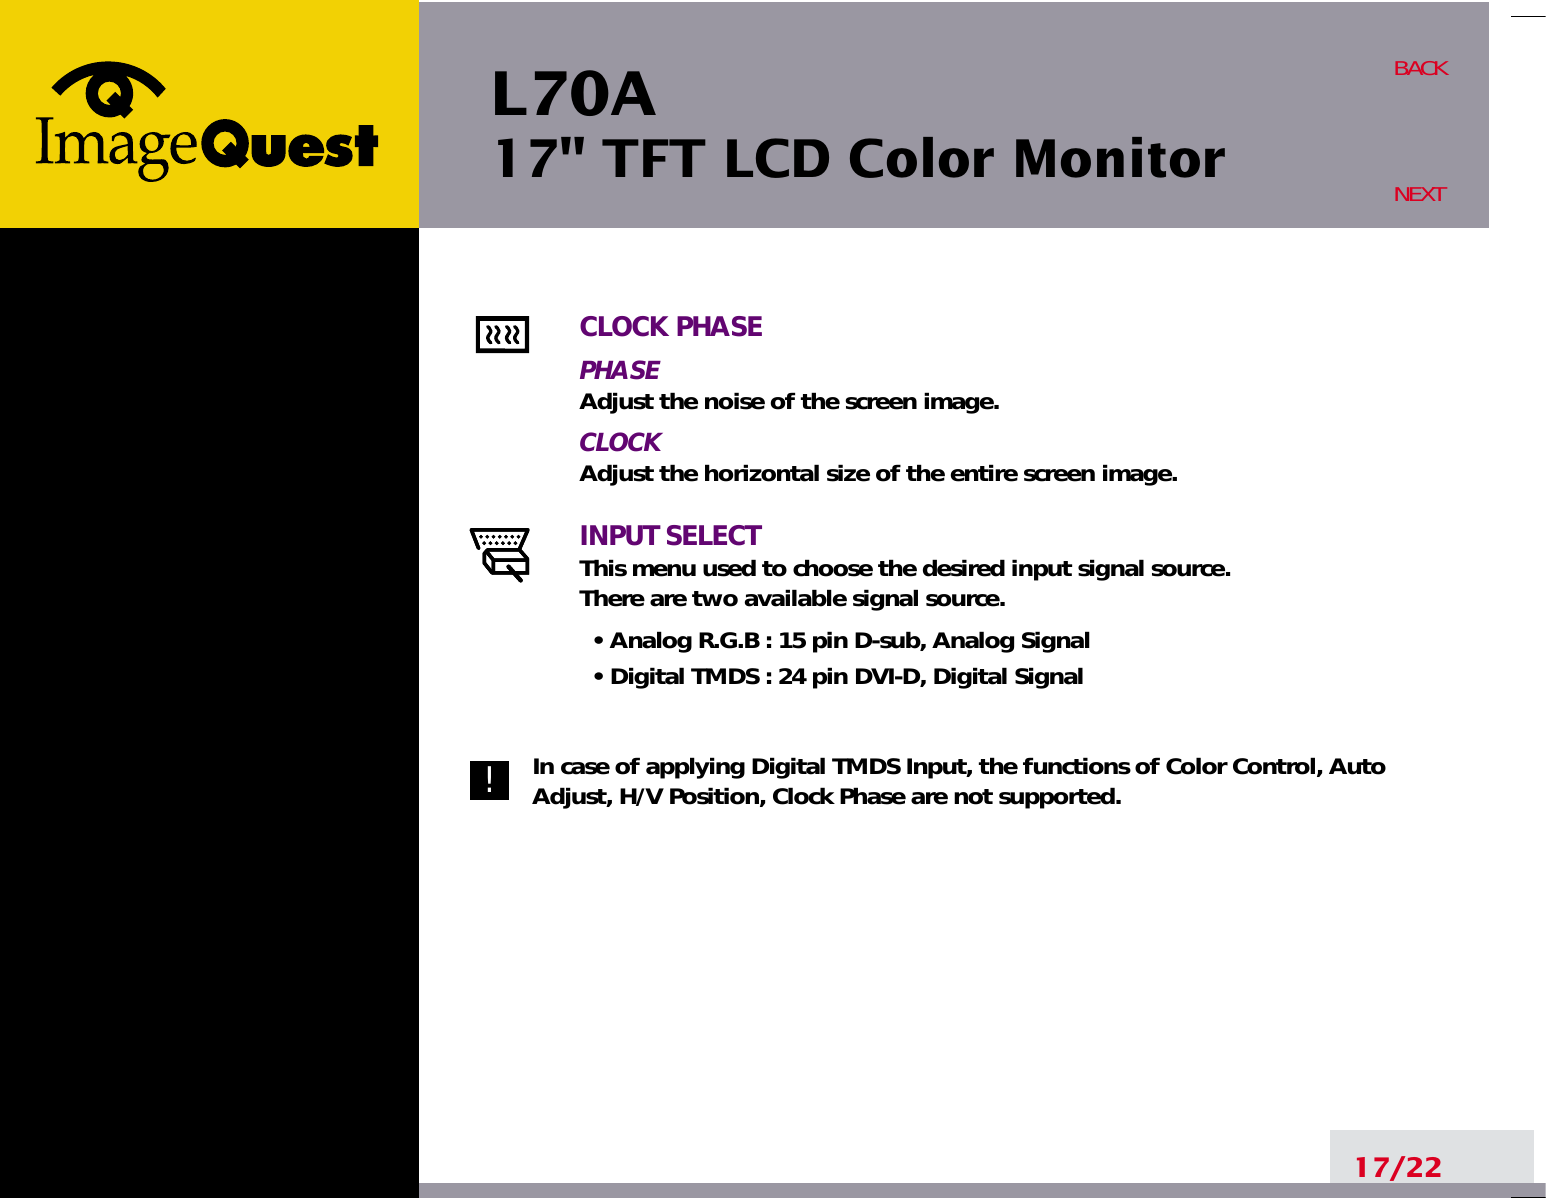 L70A17&quot; TFT LCD Color Monitor17/22BACKNEXTCLOCK PHASEPHASEAdjust the noise of the screen image.CLOCKAdjust the horizontal size of the entire screen image.INPUT SELECTThis menu used to choose the desired input signal source.There are two available signal source.• Analog R.G.B : 15 pin D-sub, Analog Signal• Digital TMDS : 24 pin DVI-D, Digital SignalIn case of applying Digital TMDS Input, the functions of Color Control, AutoAdjust, H/V Position, Clock Phase are not supported.!